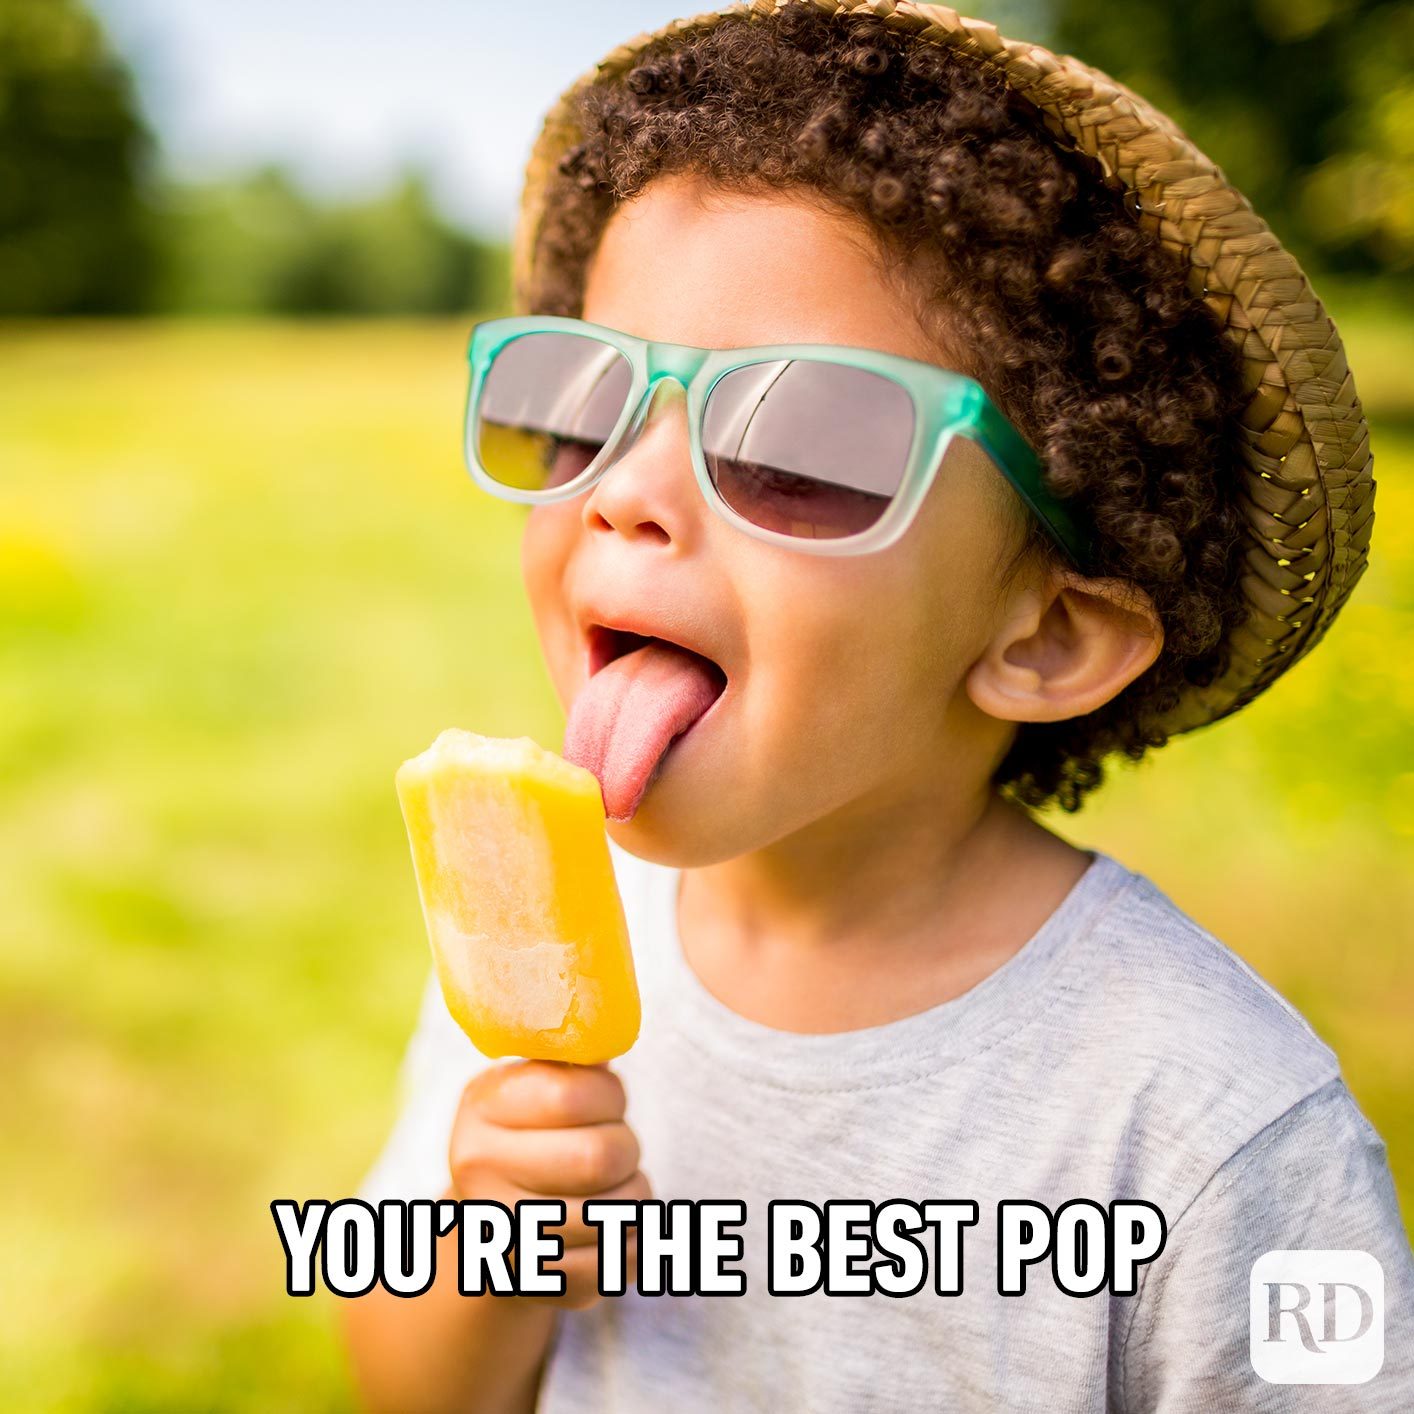 Child with popsicle. Meme text: You’re the best pop